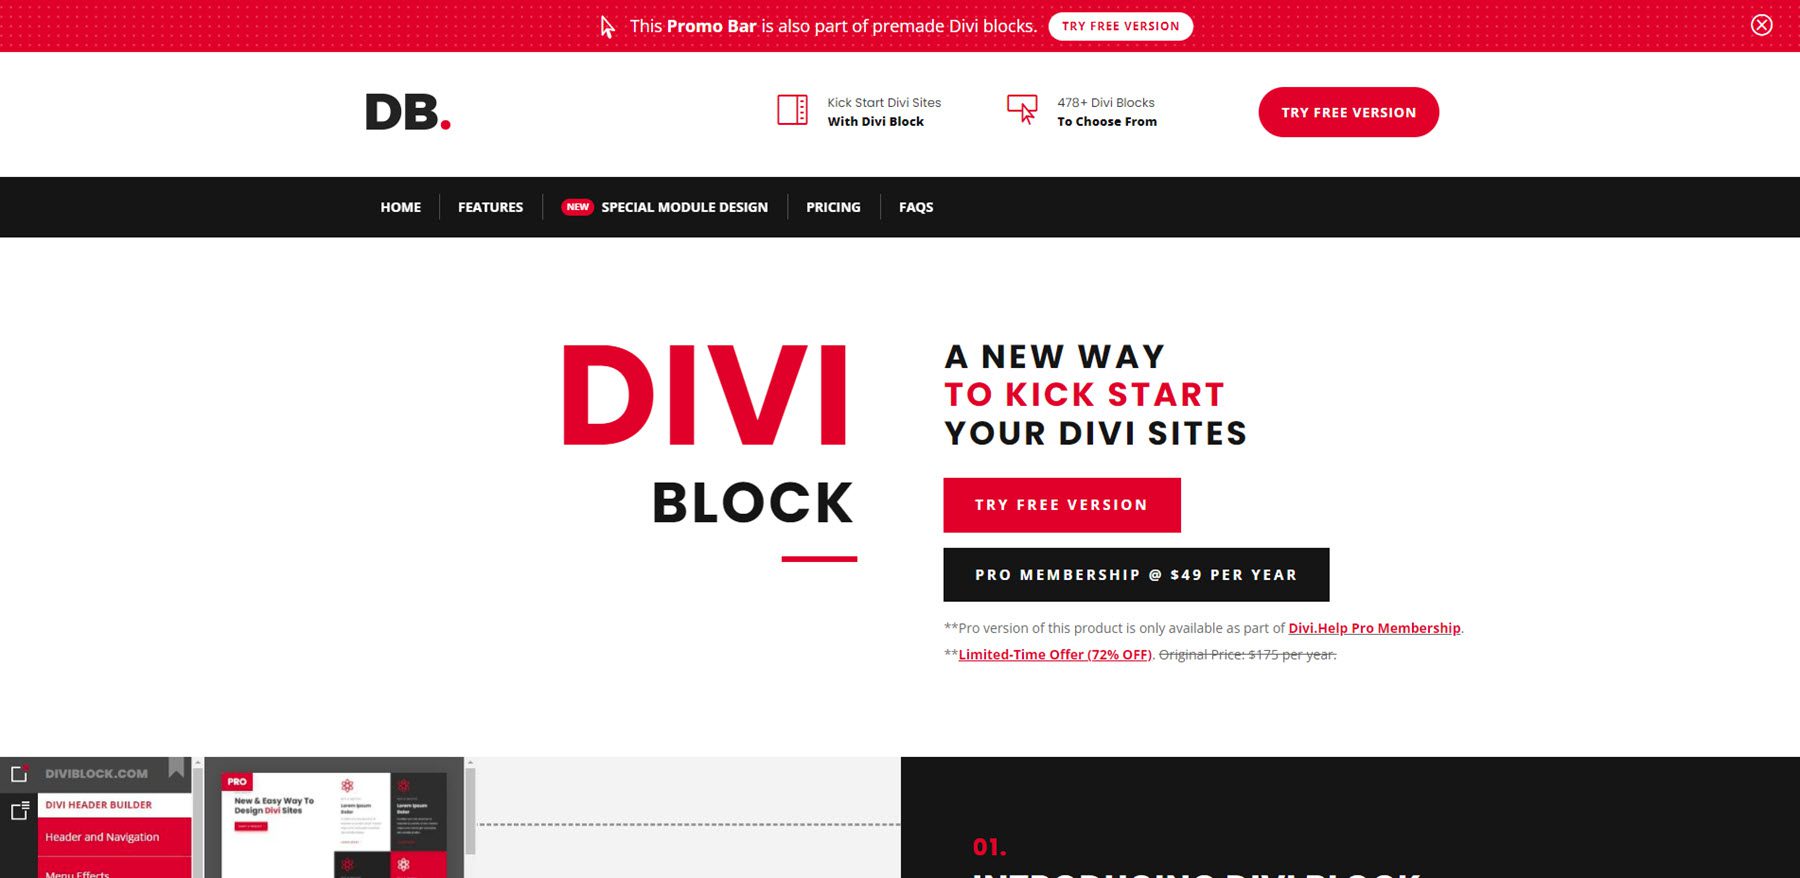 Where to Get Divi Block